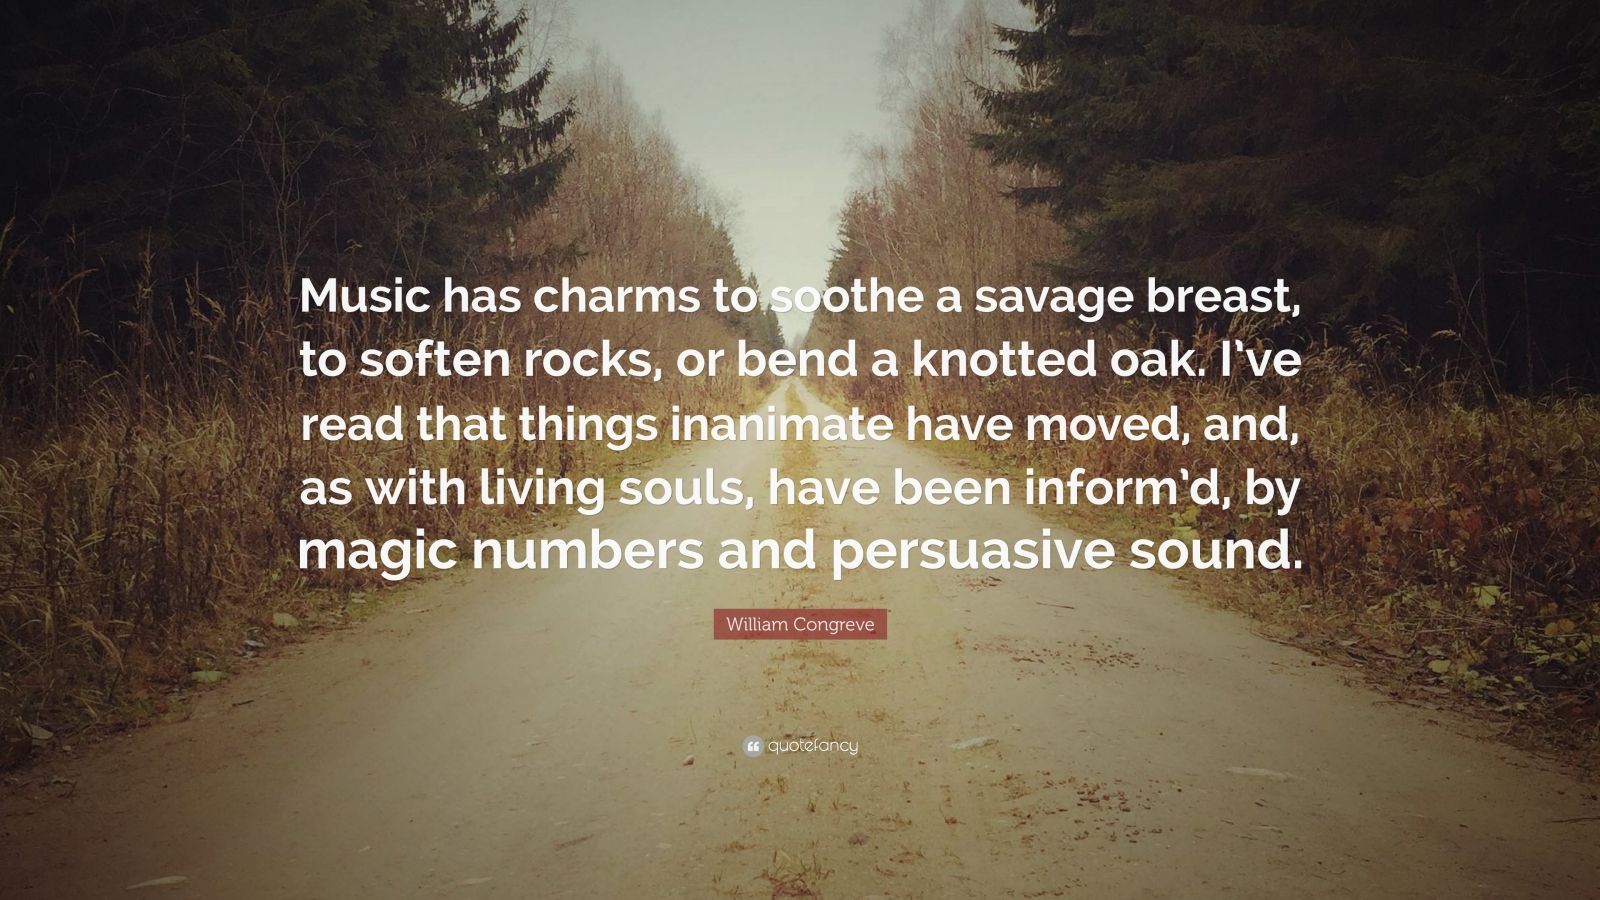 soothe to has breast the charms Music savage